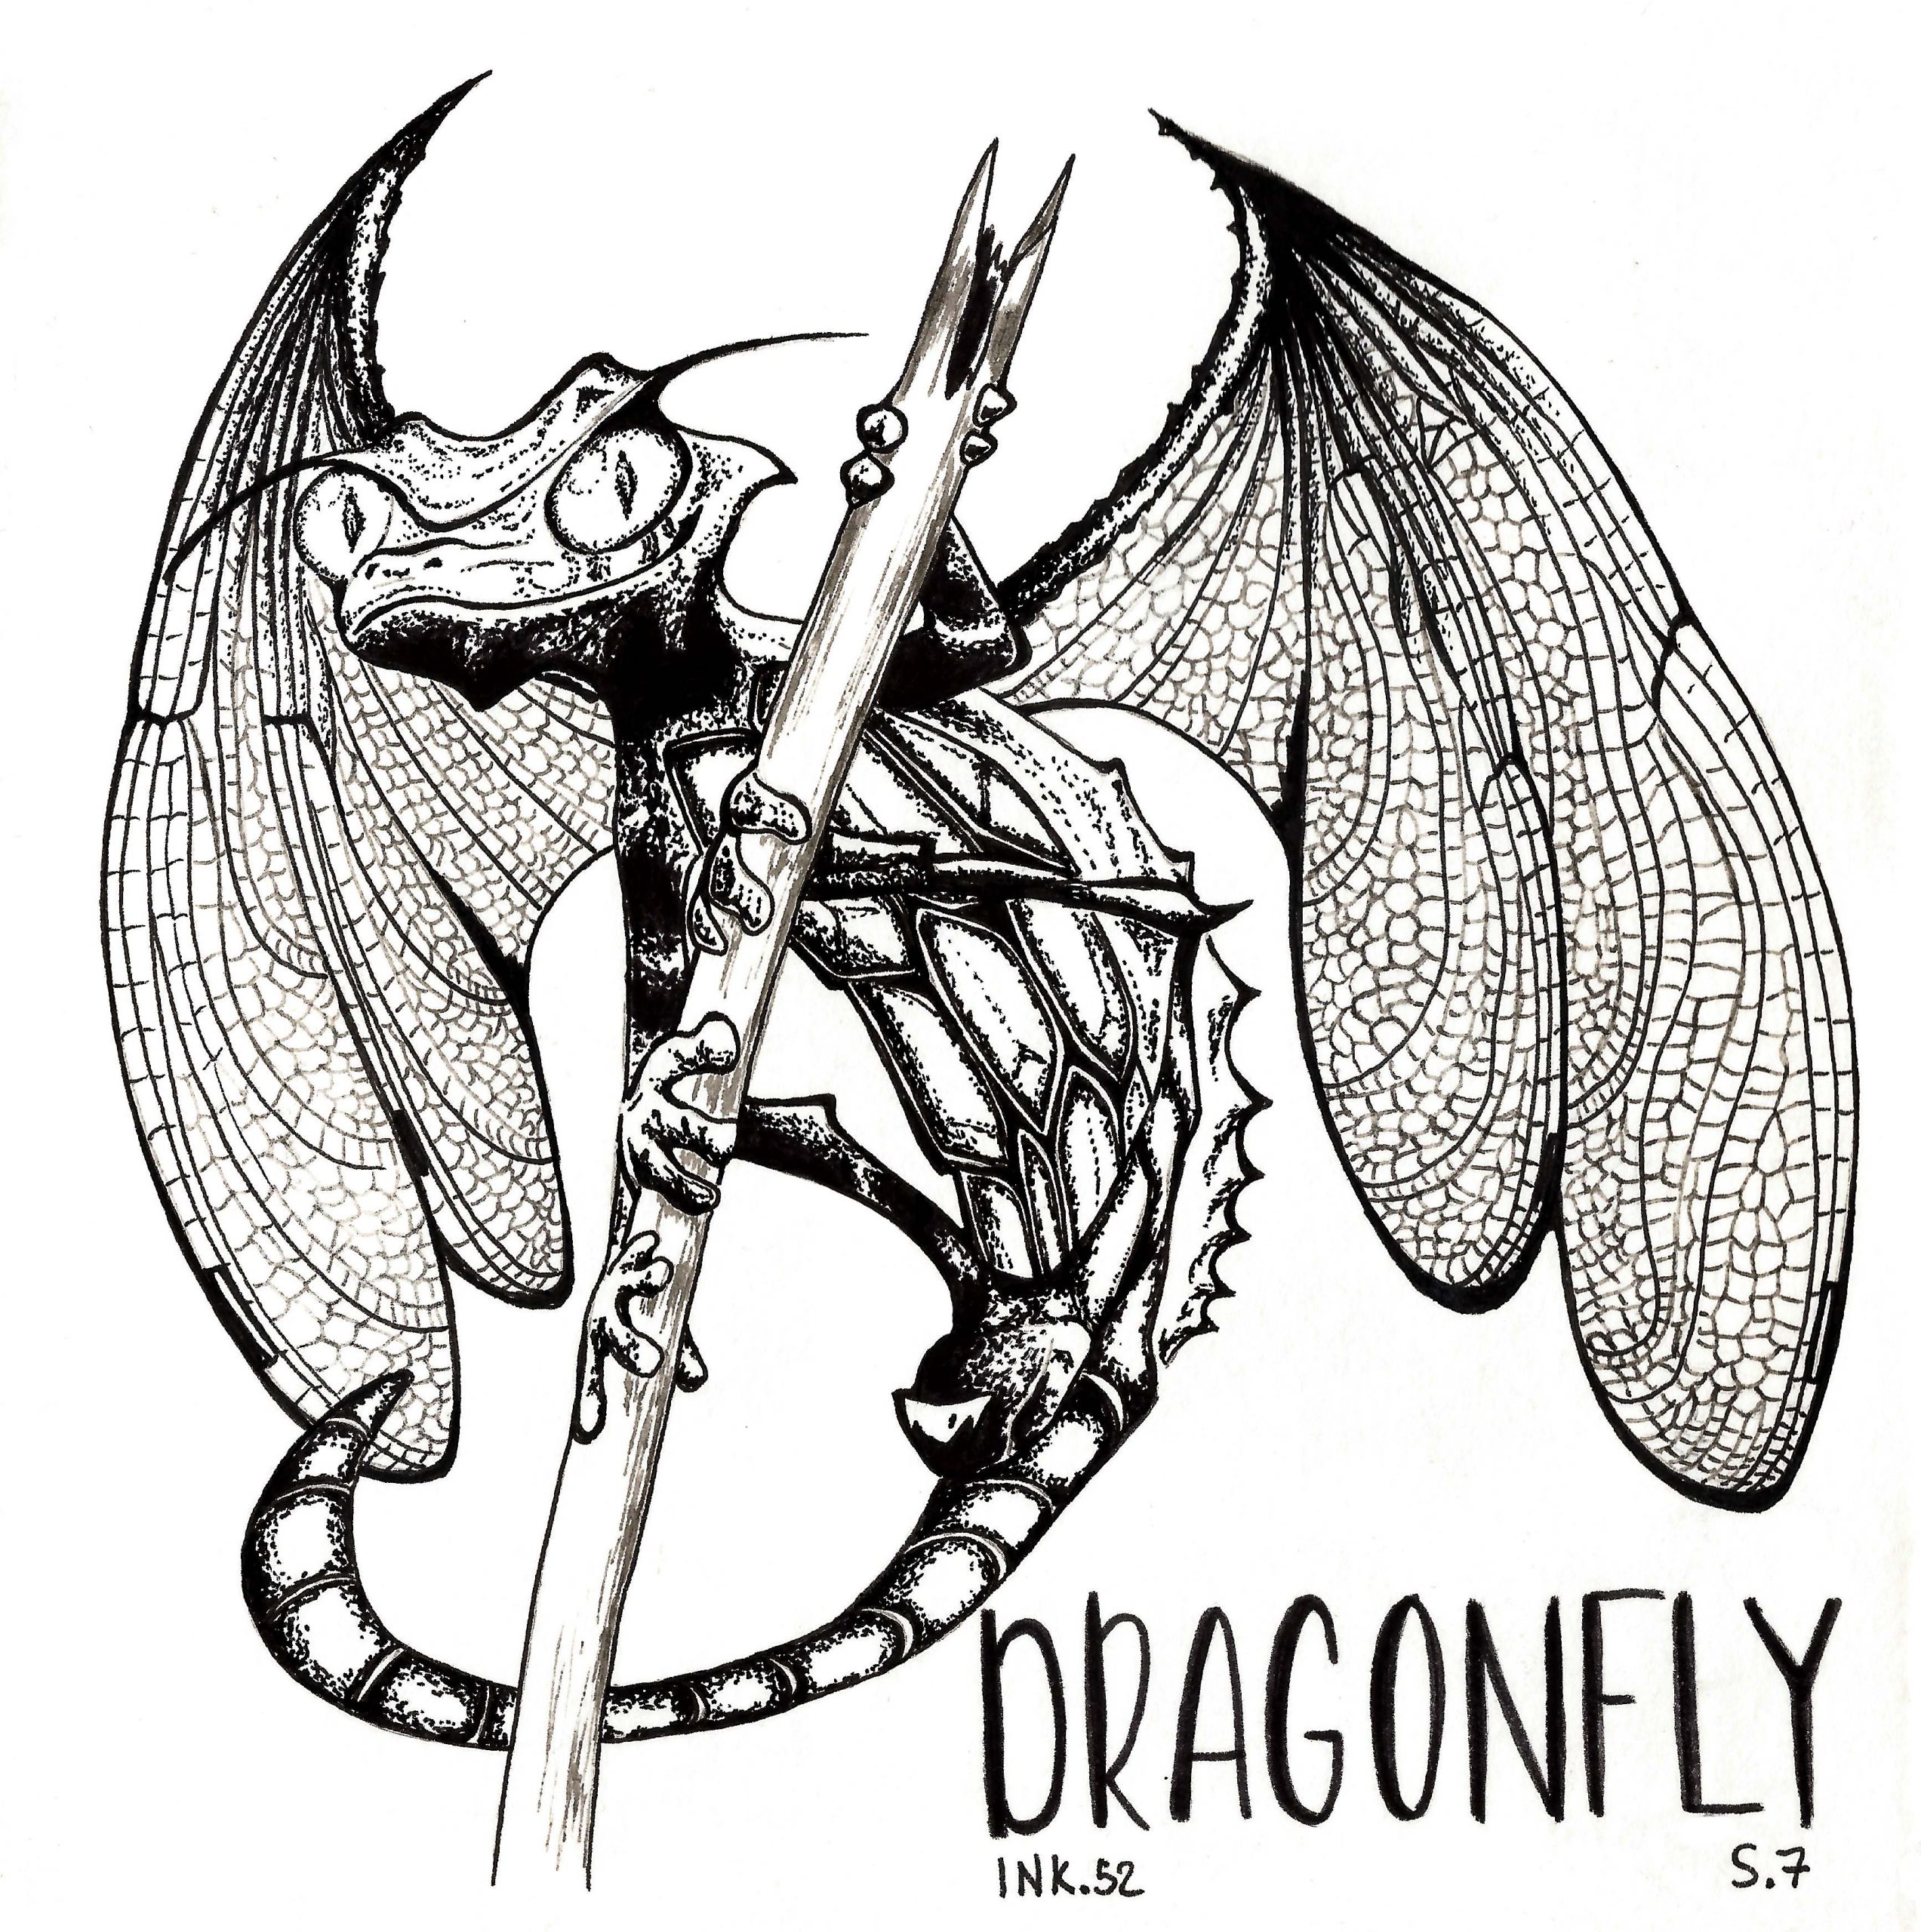 S.7 DRAGONFLY